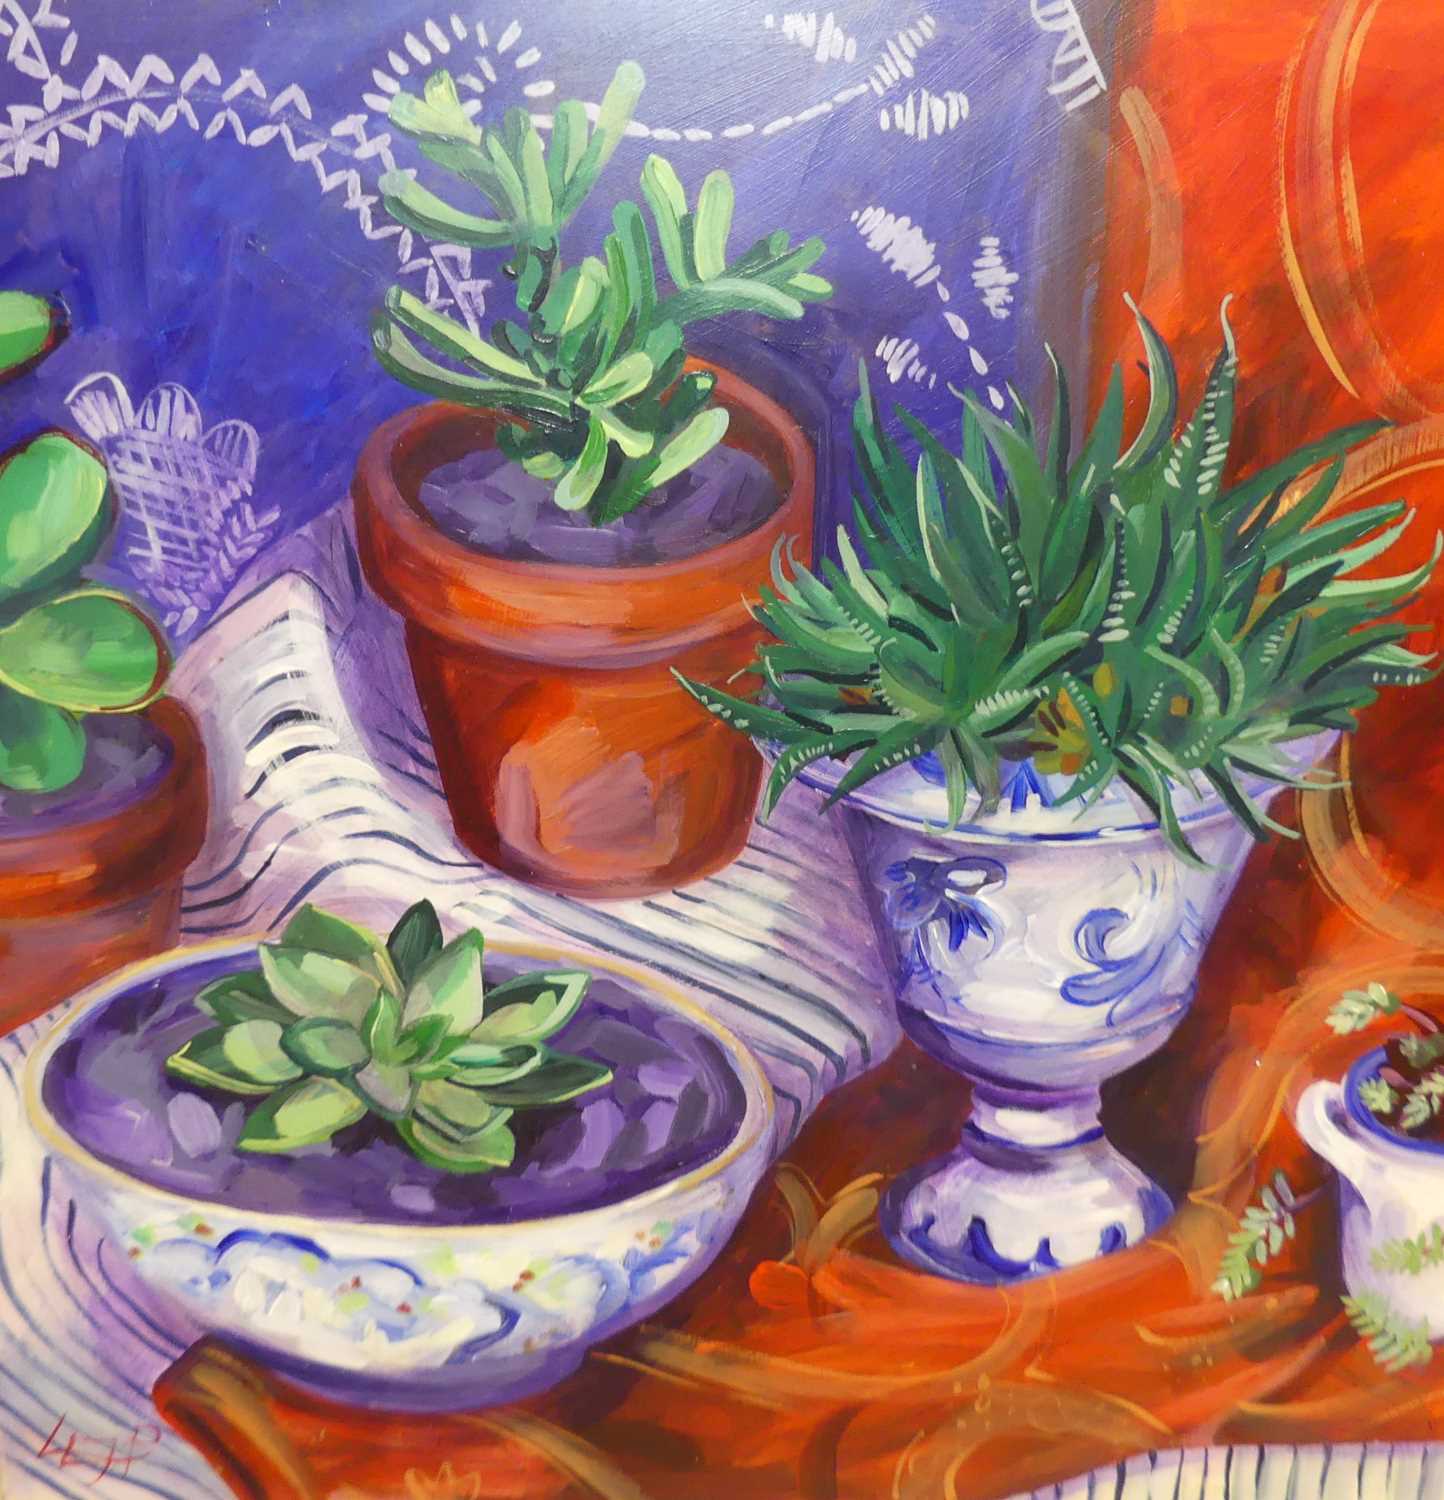 Contemporary school - still life with crocus plants in various bowls, acrylic, 55x55cm - Image 2 of 3